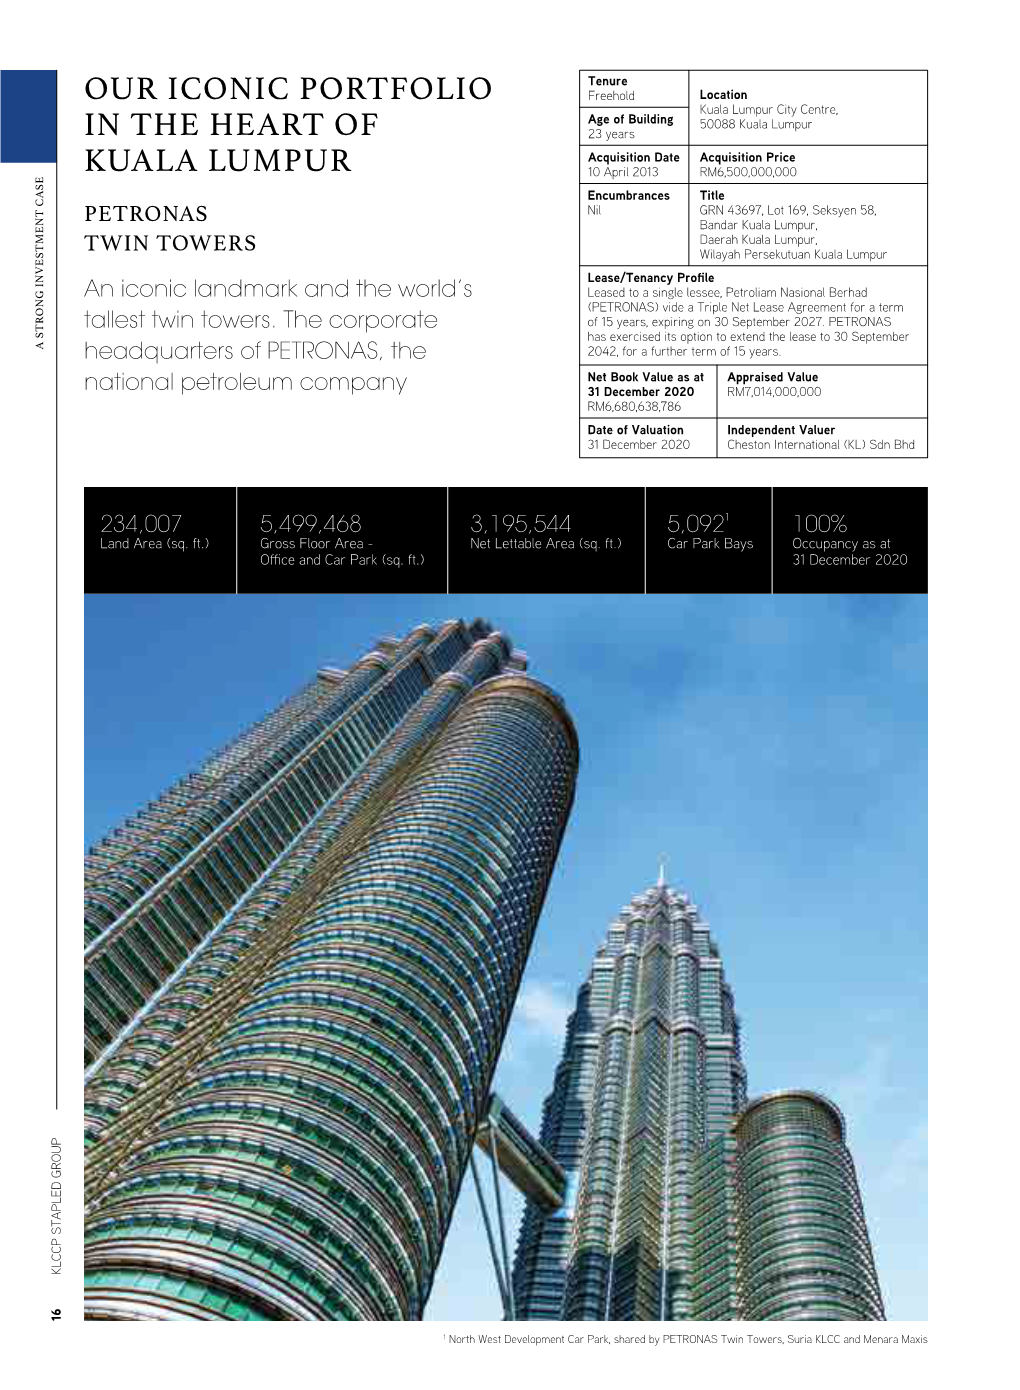 Our Iconic Portfolio in the Heart of Kuala Lumpur